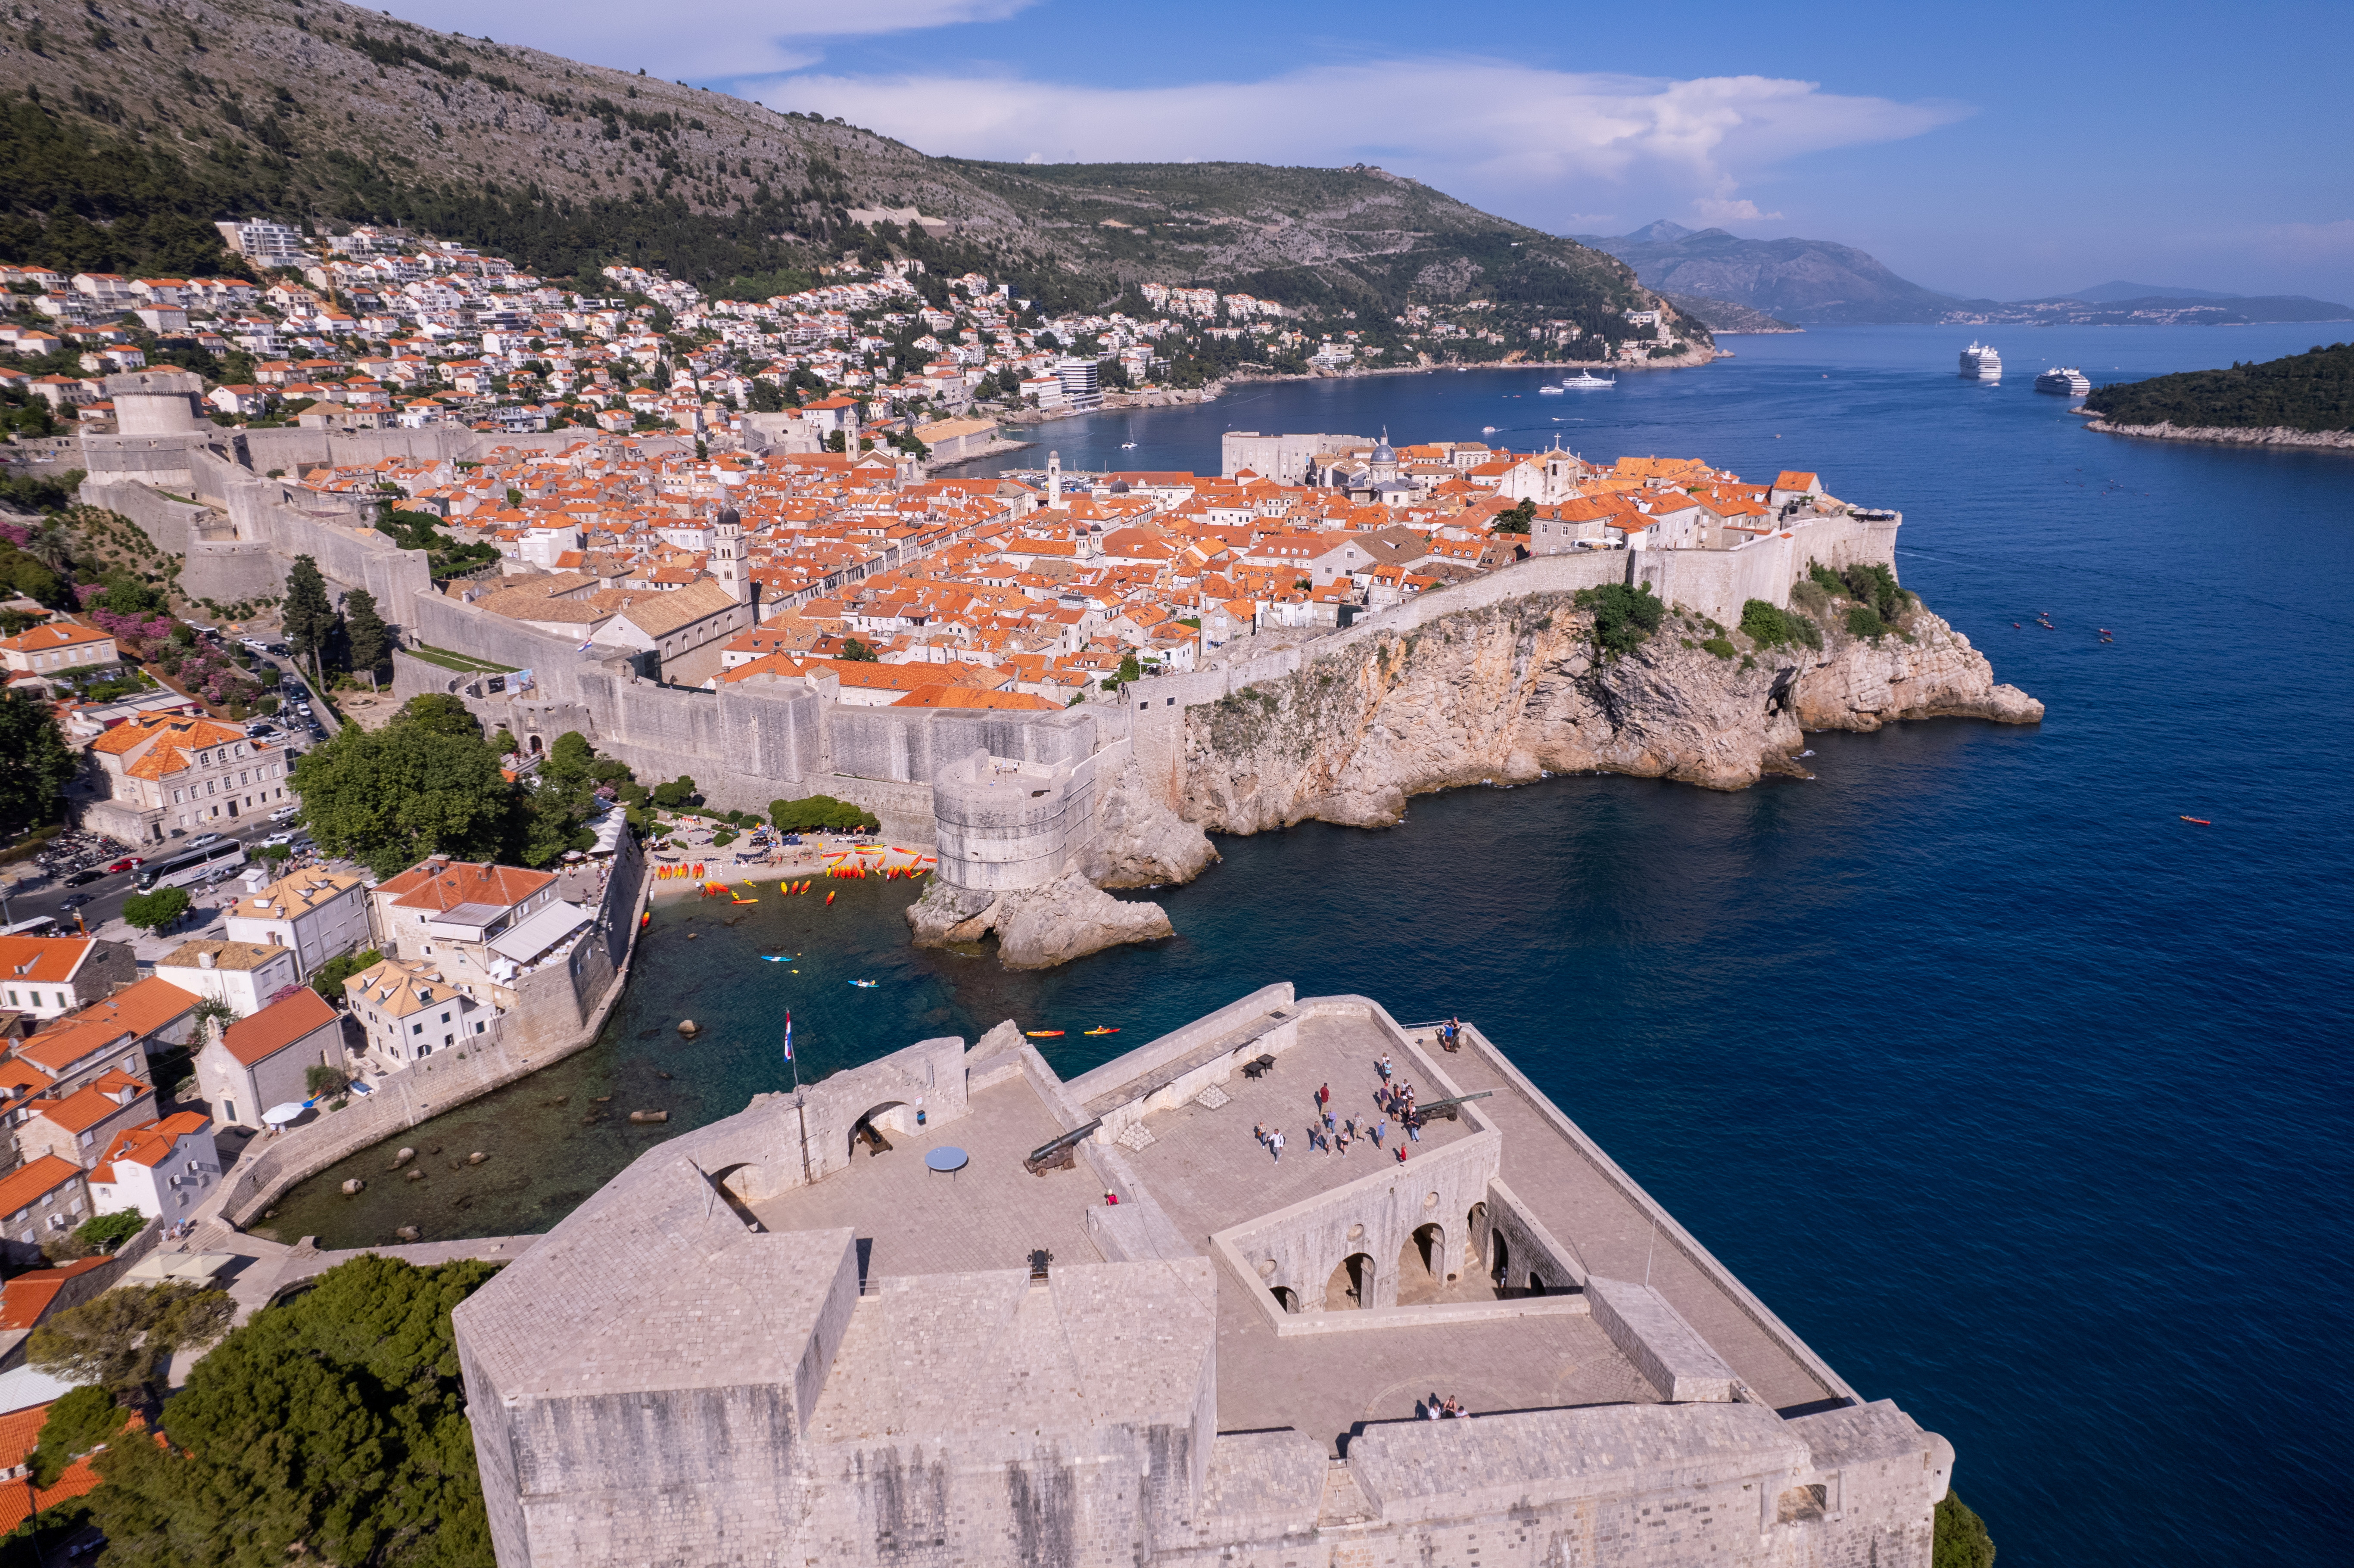 A general view of Dubrovnik